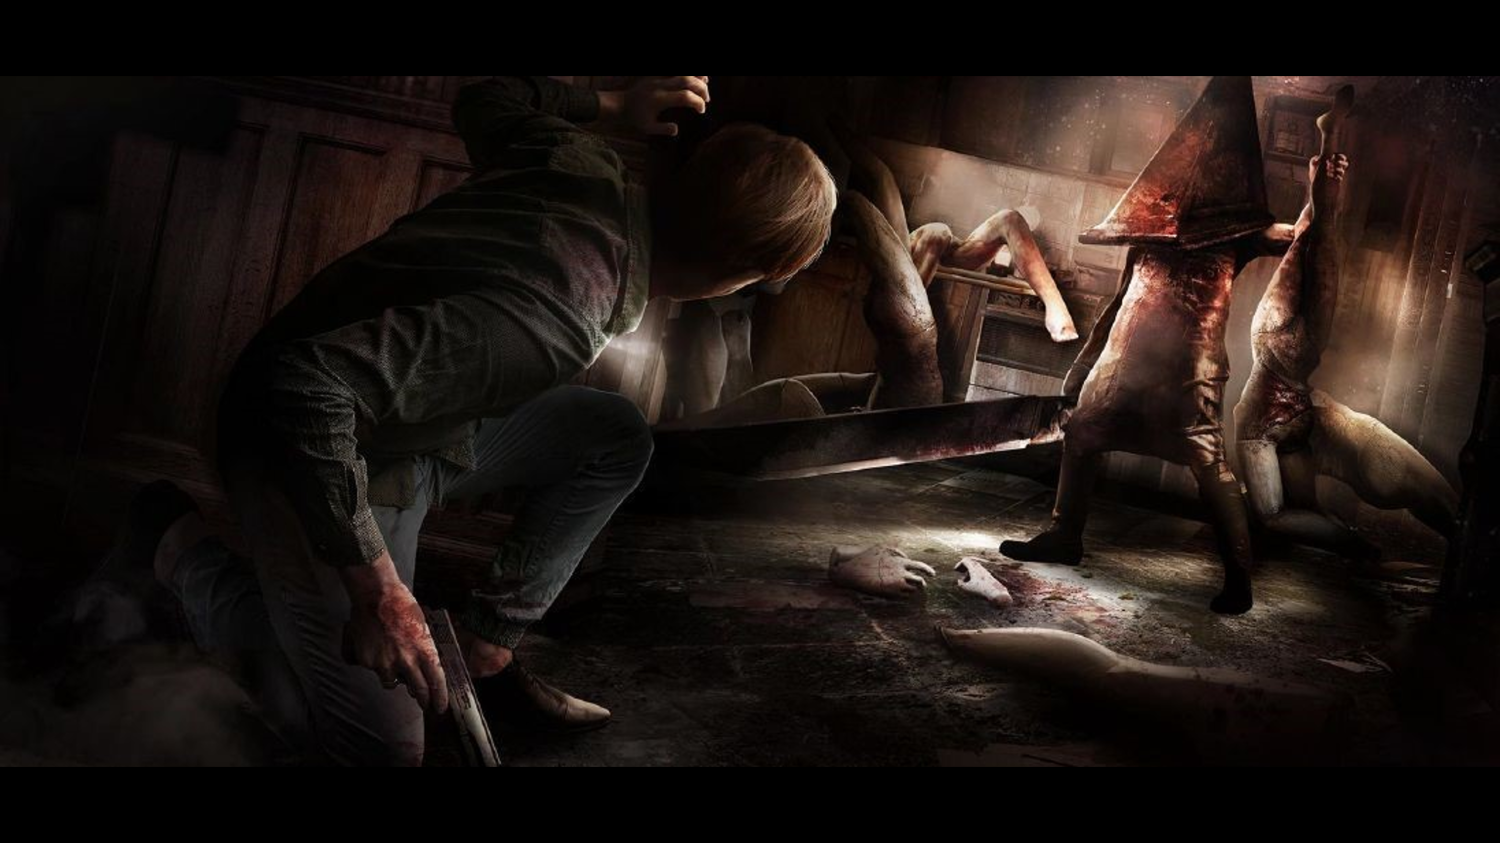 Silent Hill 2 Remake (PS5) First Look - Video Game Reviews, News